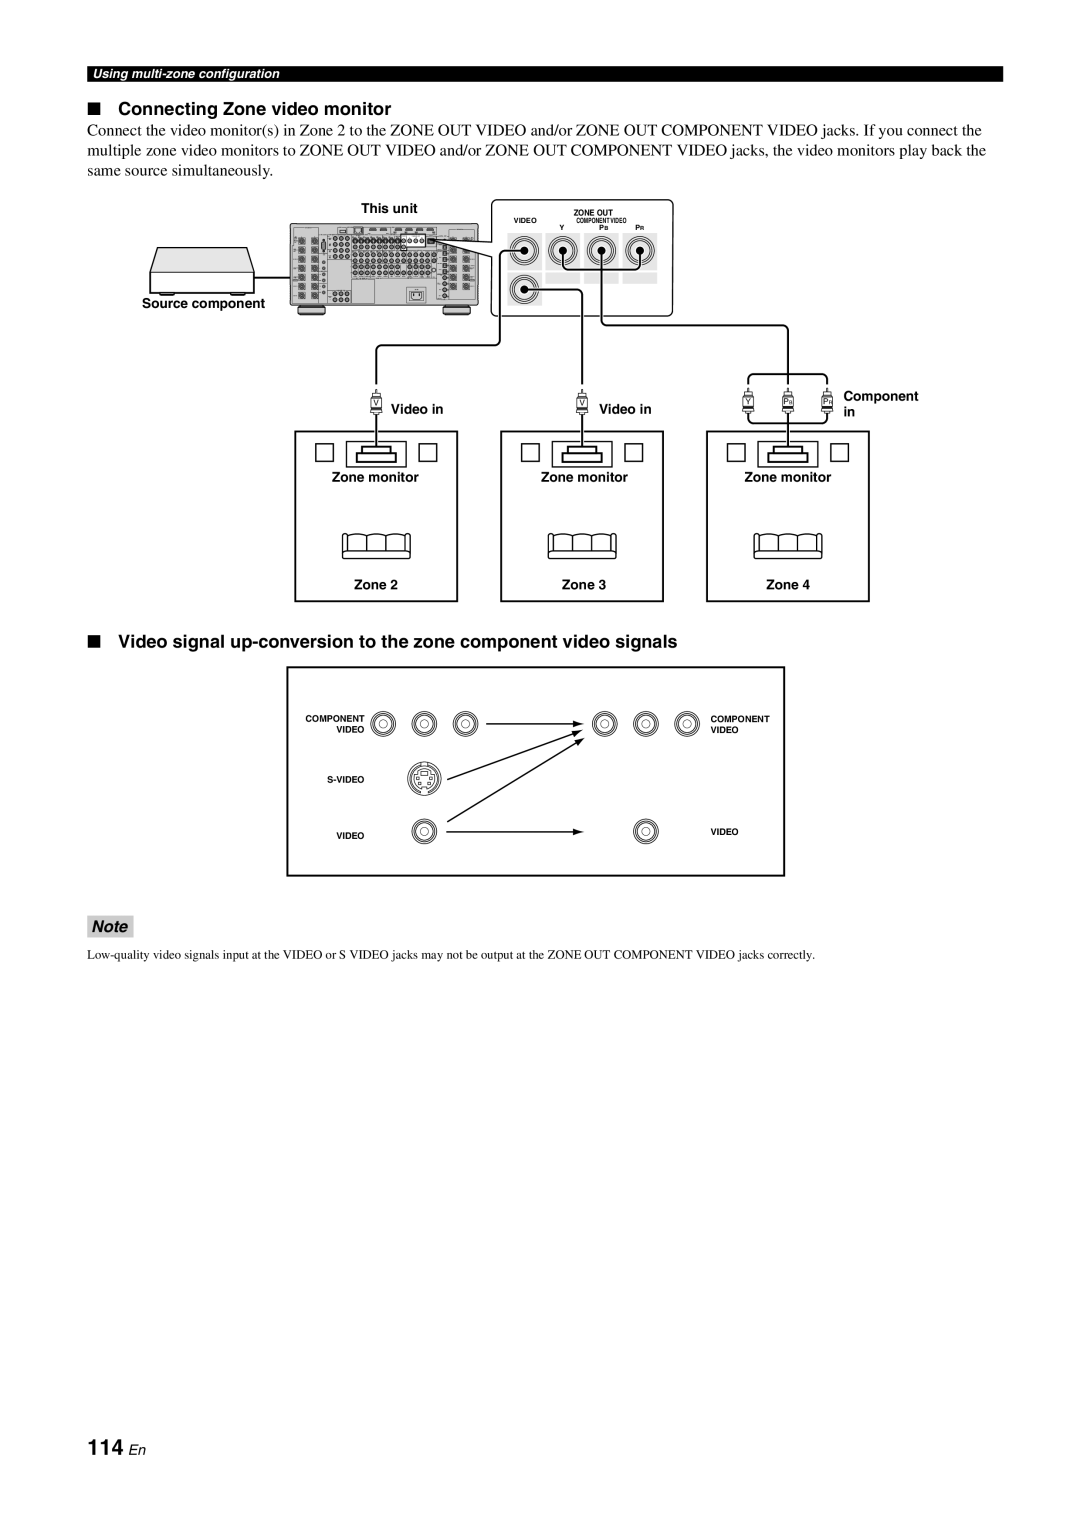 Yamaha DSP-Z11 owner manual 114 En, Connecting Zone video monitor 